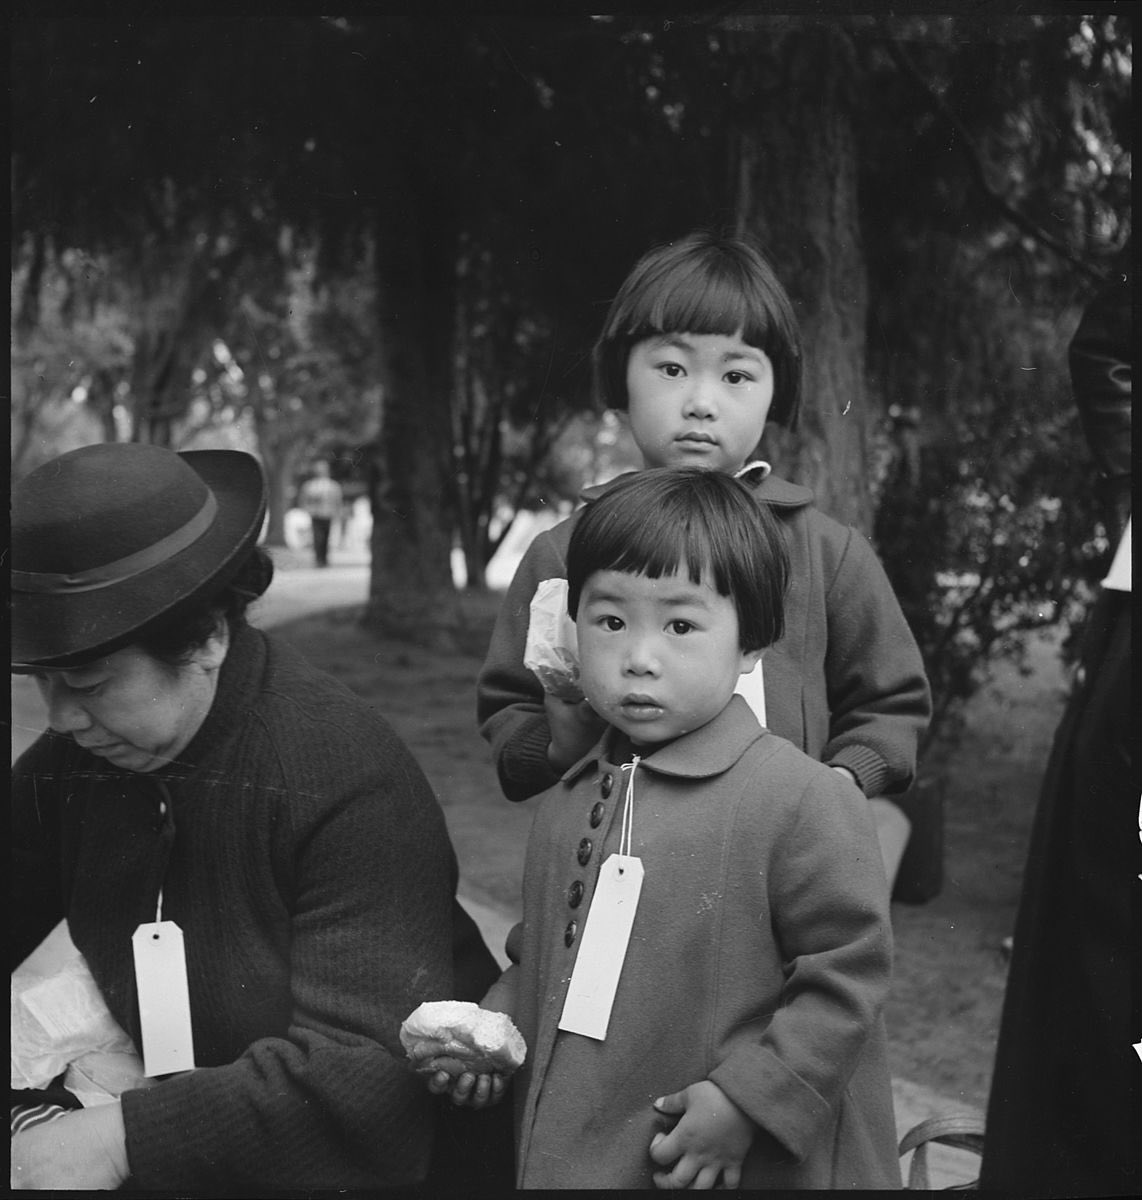 Two children of the Mochida family who, with their parents, are awaiting evacuation bus, Hayward, California, USA, 8 May 1942, by Dorothea Lange, an American documentary photographer and photojournalist